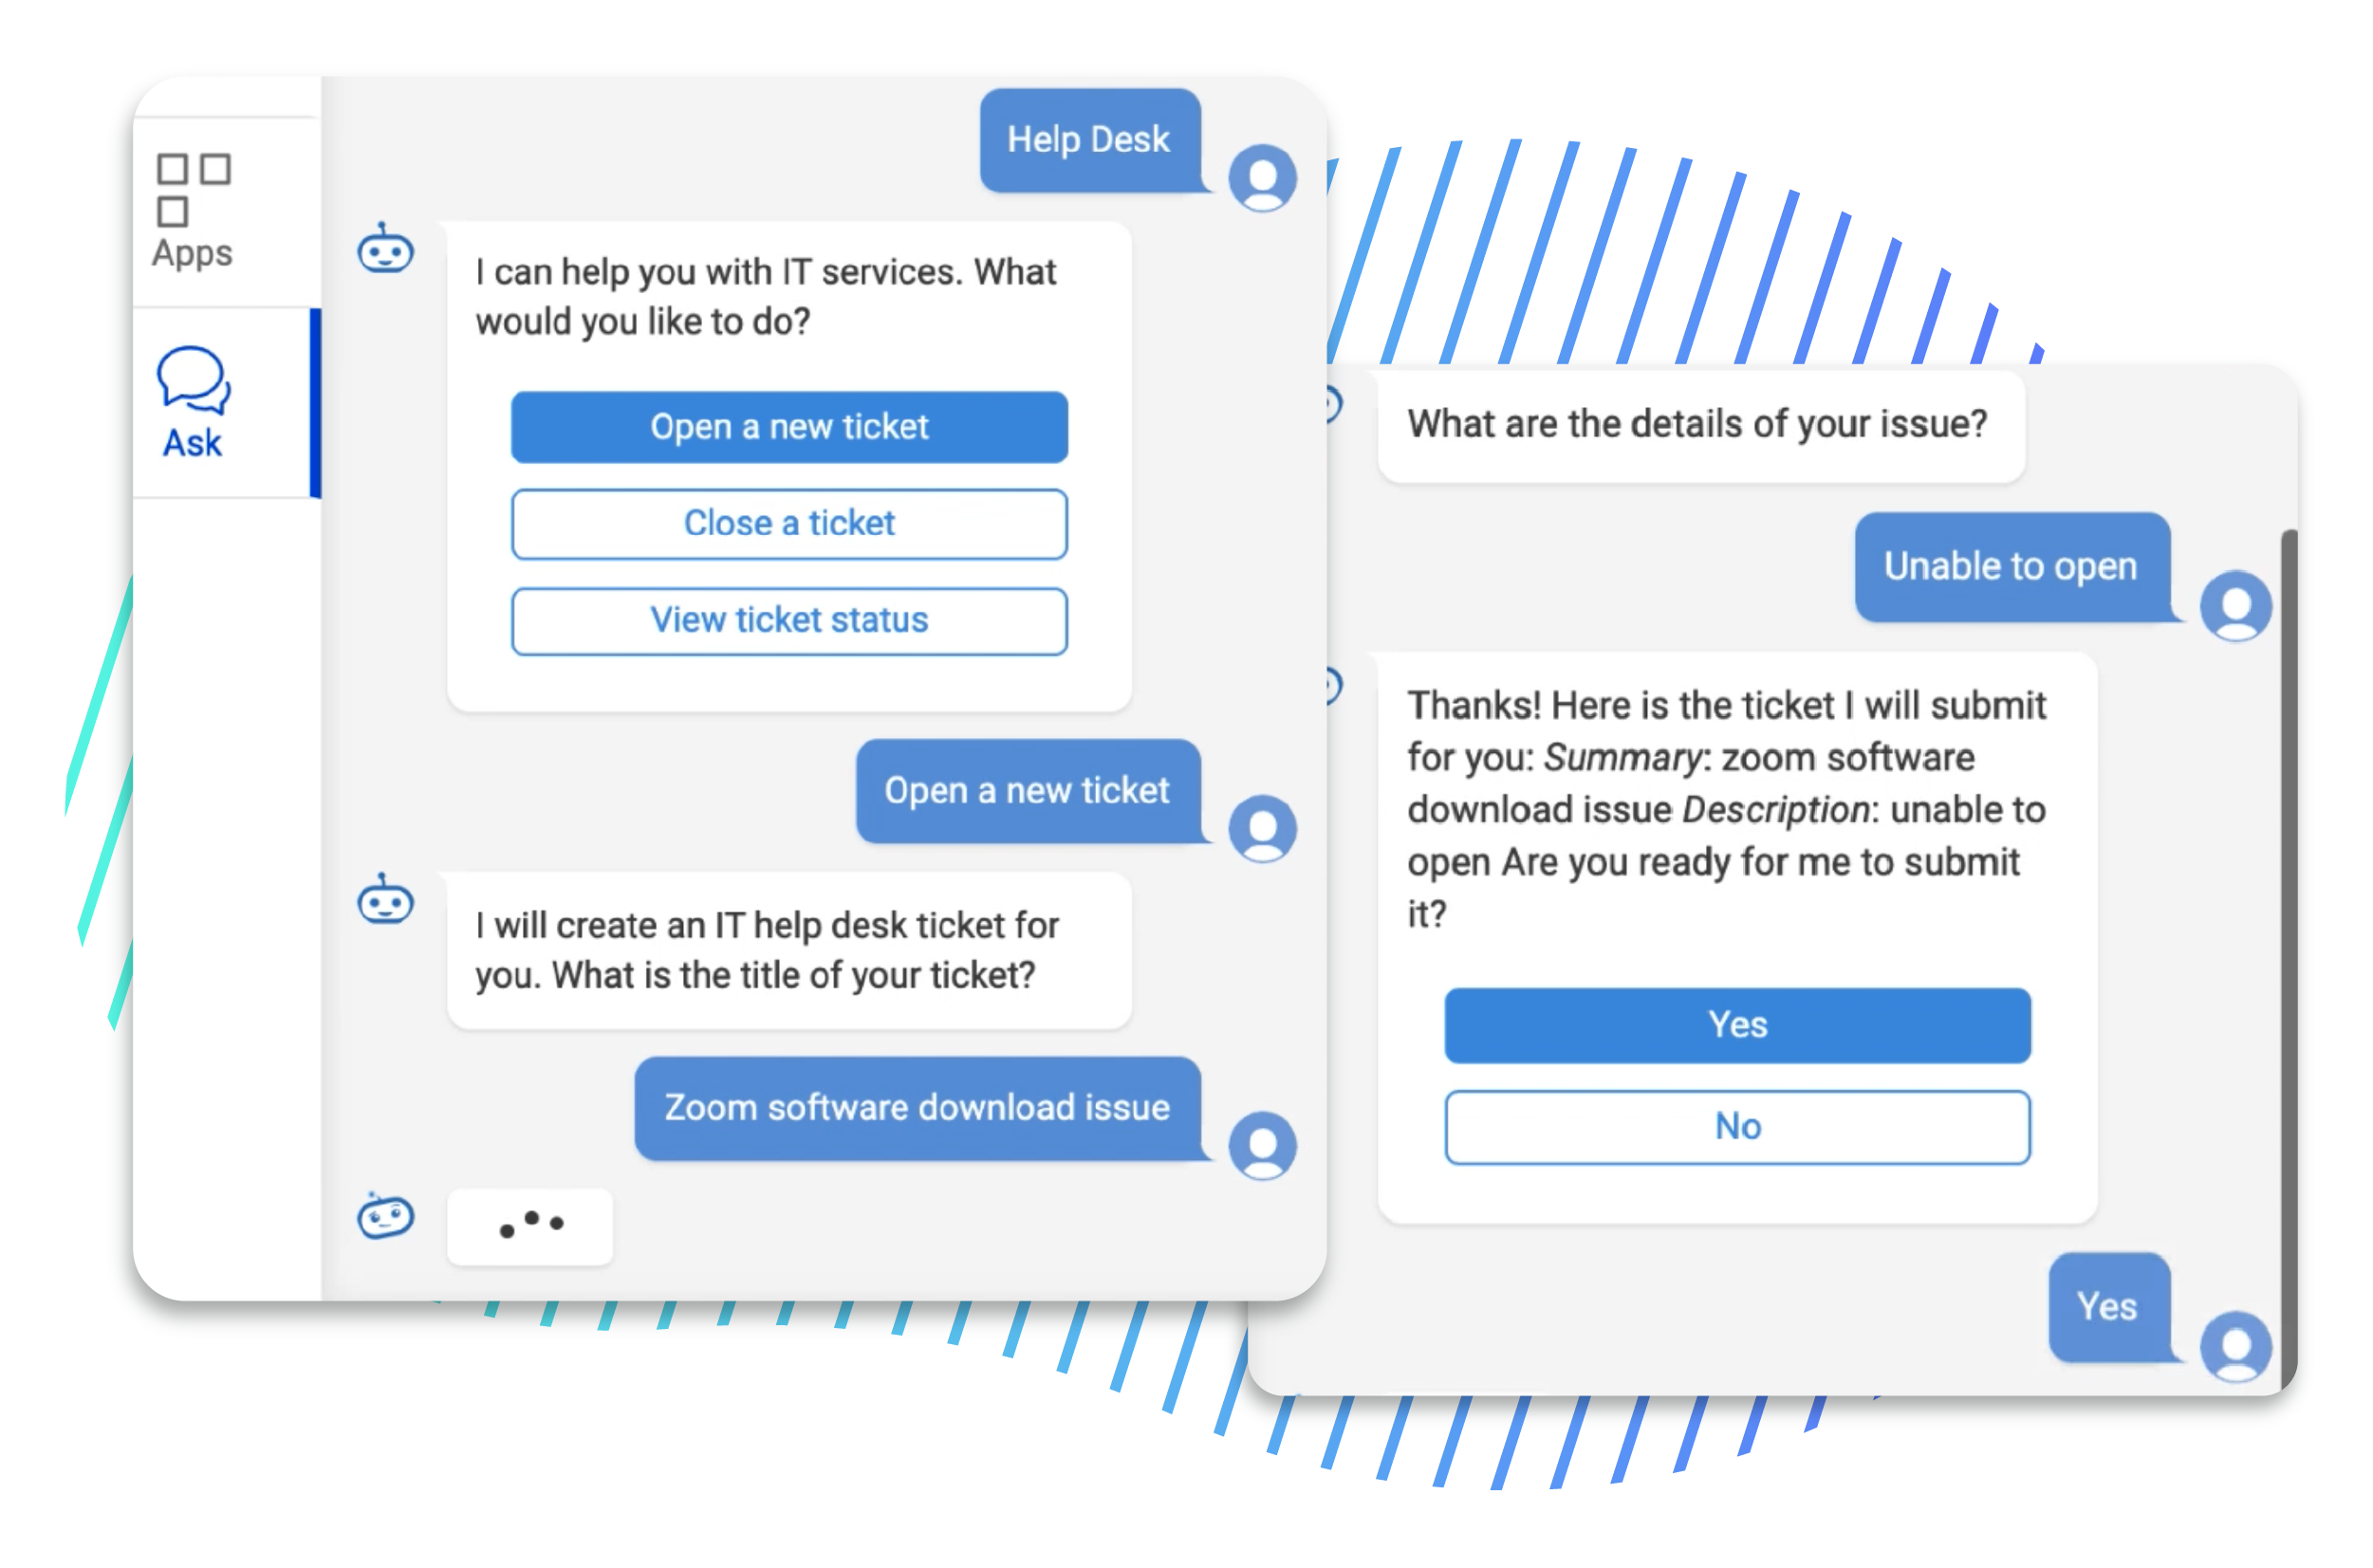 Automation of common tasks like submitting an IT help desk ticket through a chatbot can help improve employee experience